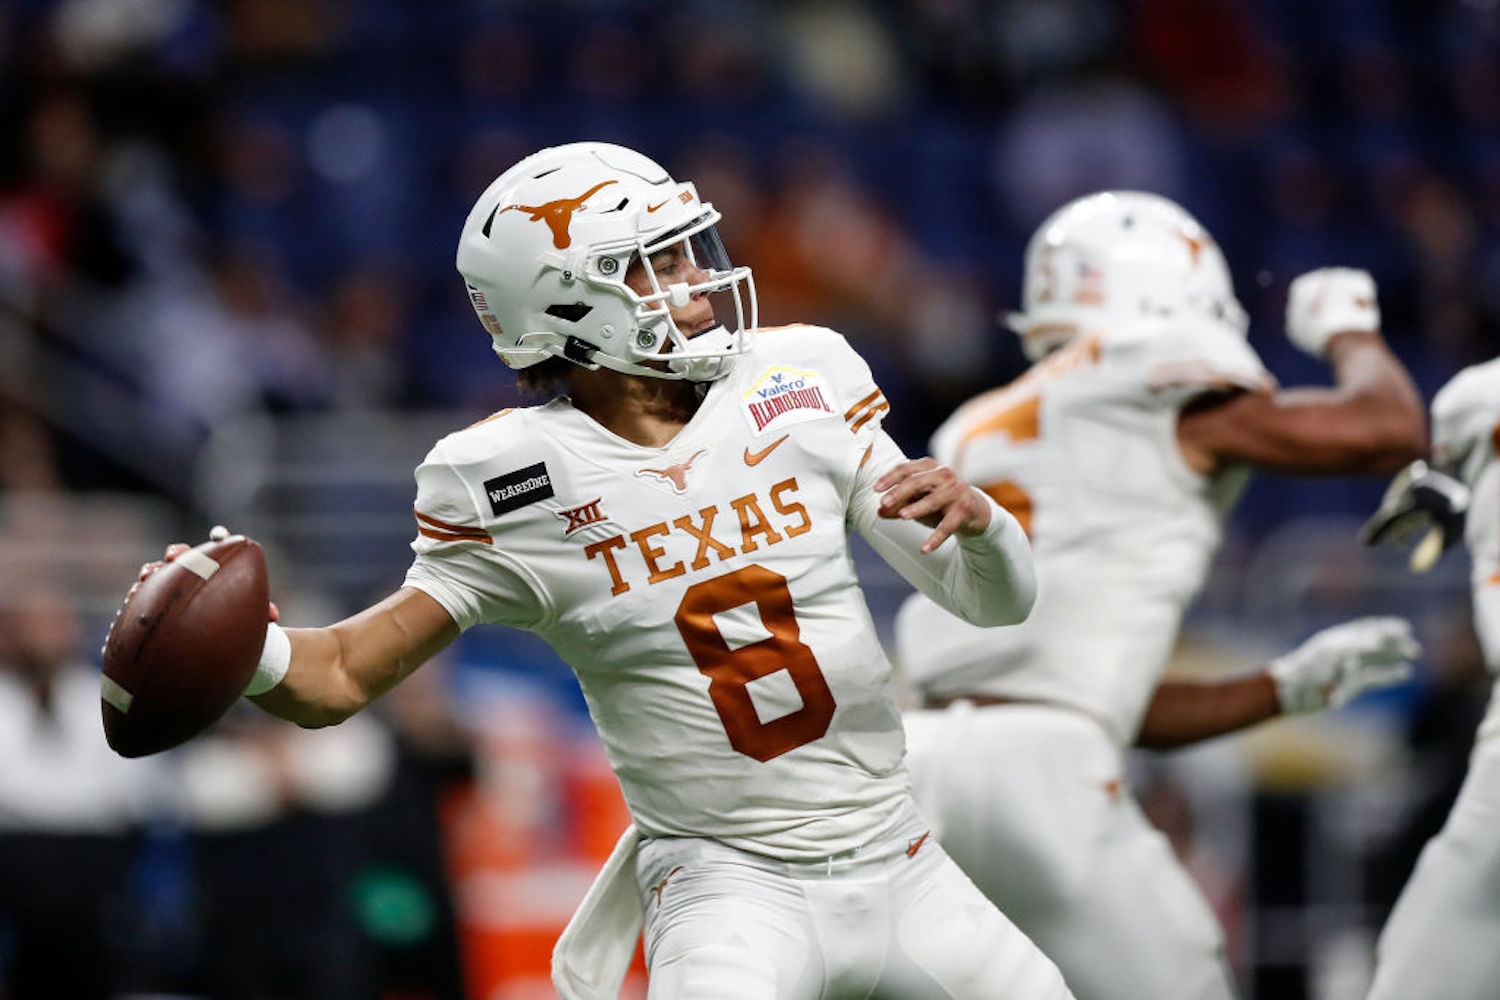 The Texas Longhorns haven't met expectations under Tom Herman, but QB Casey Thompson could be the answer to their problems.